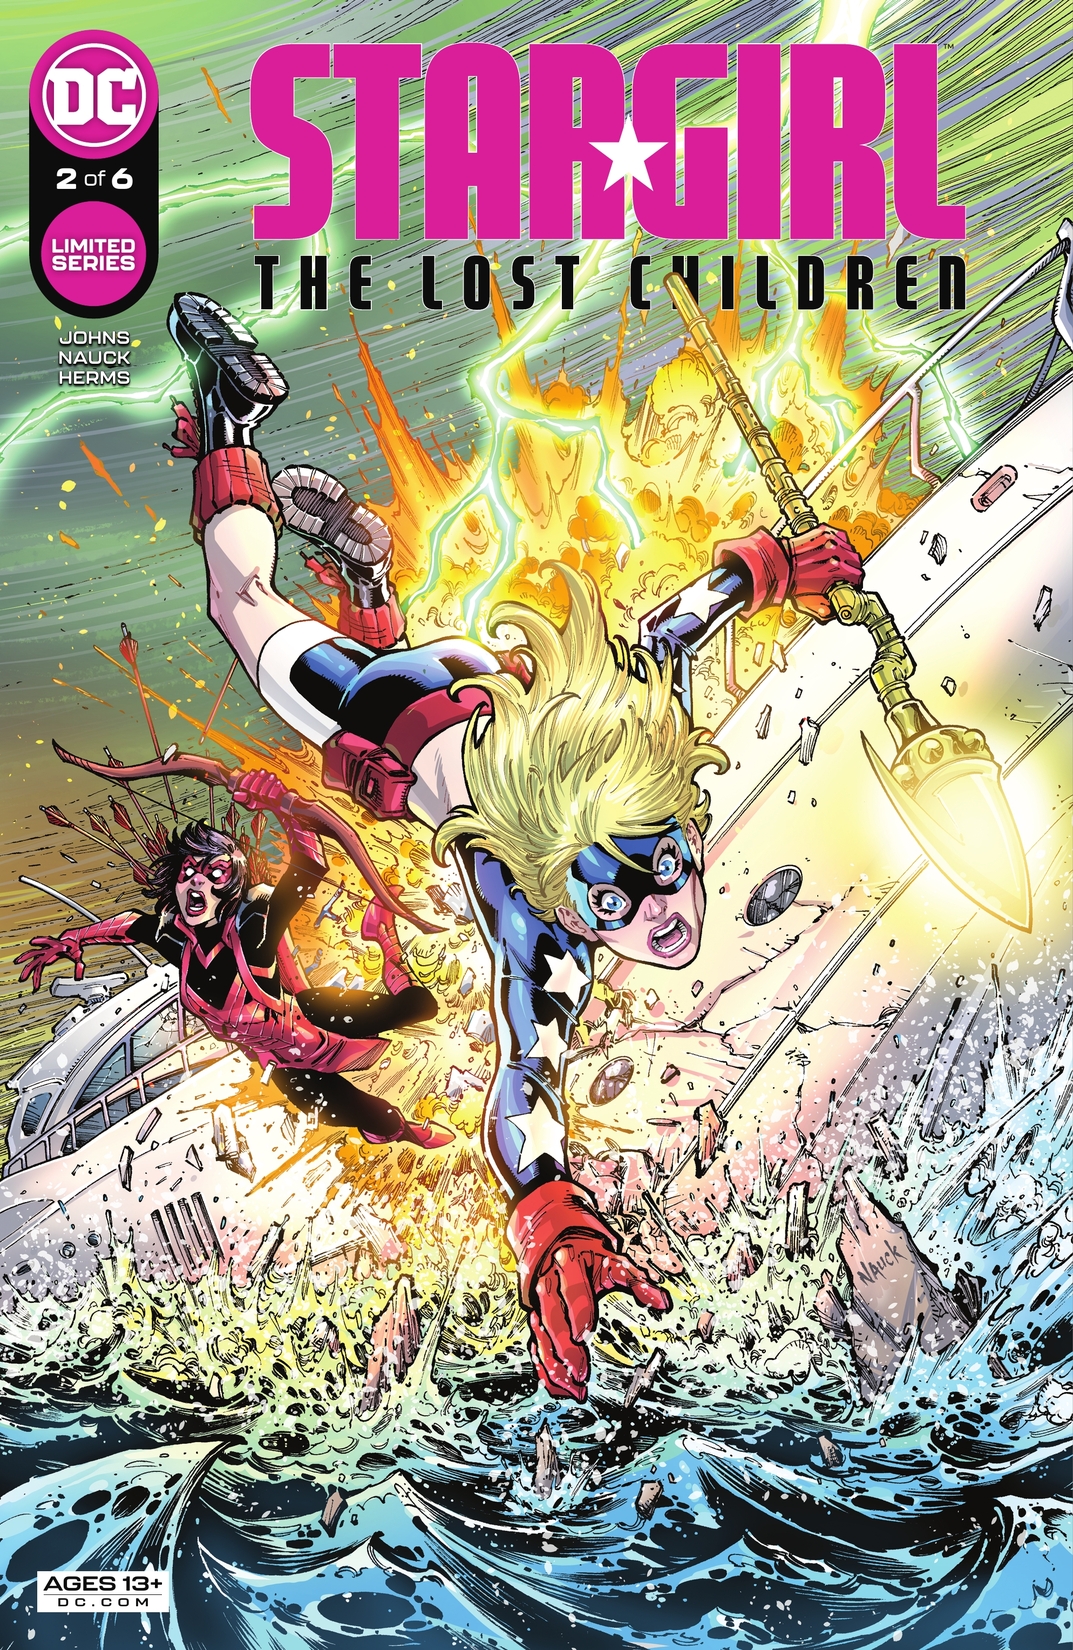 Stargirl: The Lost Children #2 preview images